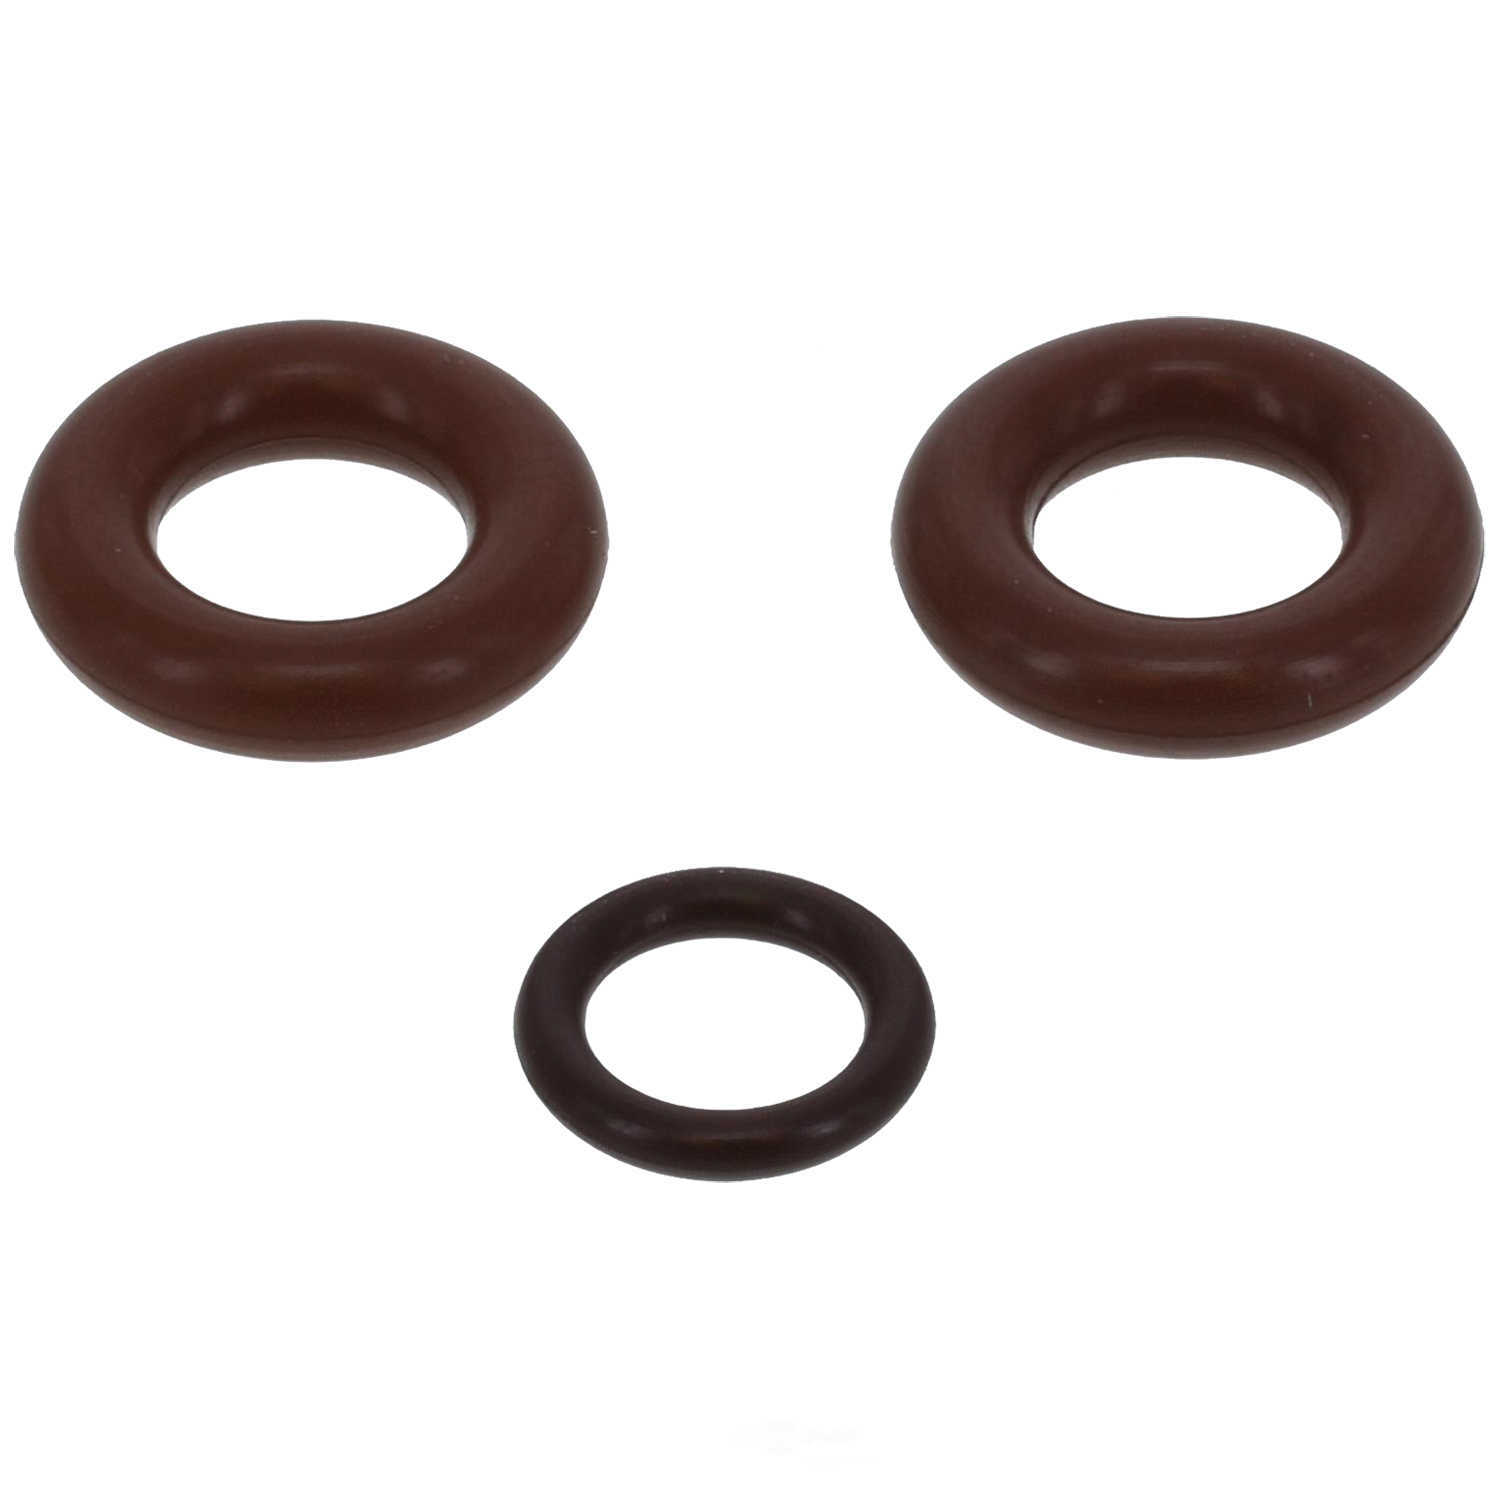 GB REMANUFACTURING INC. - Fuel Injector Seal Kit - GBR 8-038